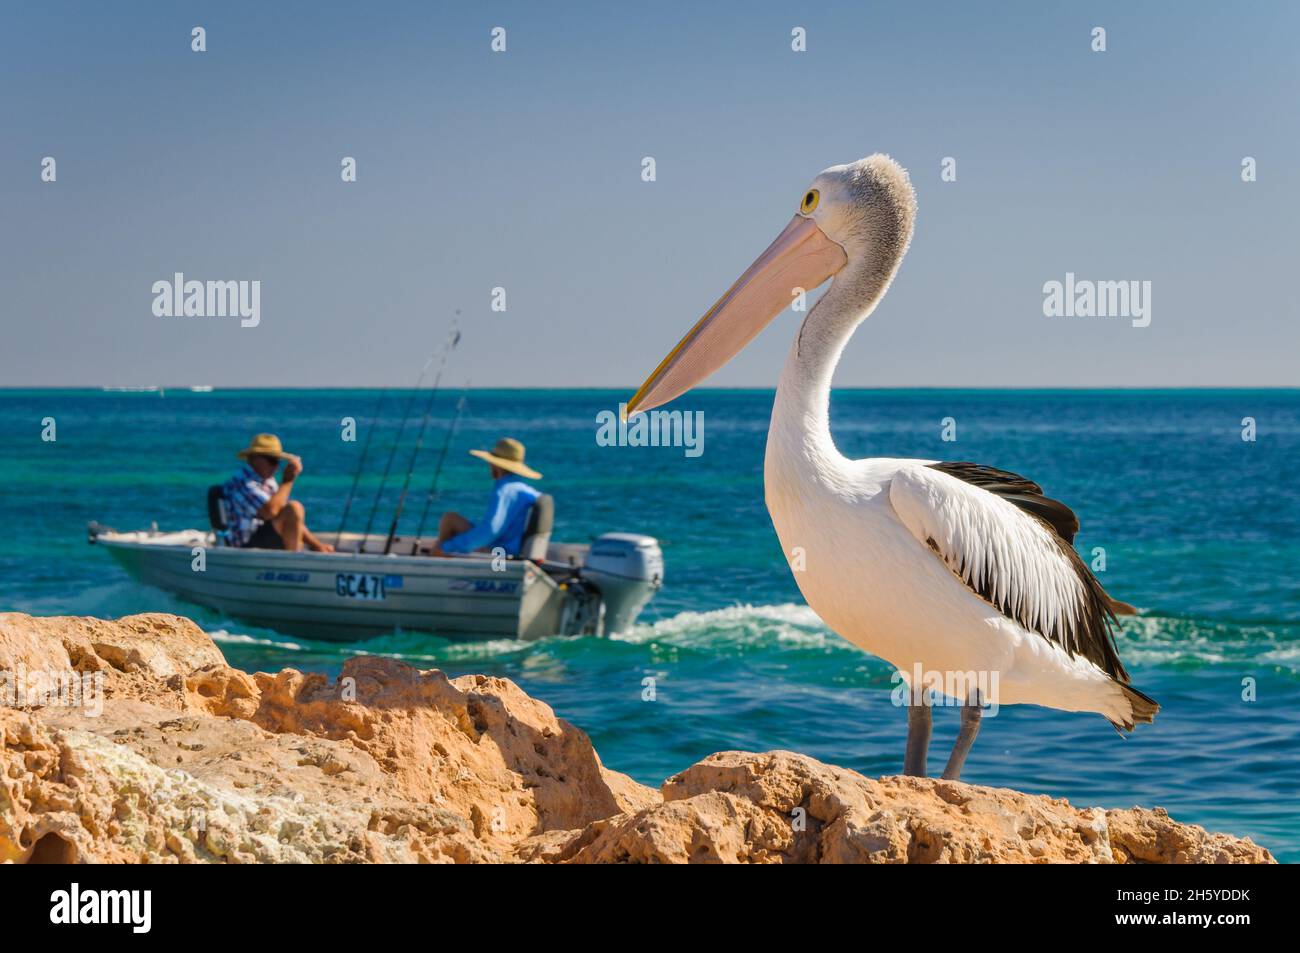 An Australian pelican stands on a rocky coastline watching the passing of two fishermen in an aluminium dinghy in Coral Bay in Western Australia. Stock Photo